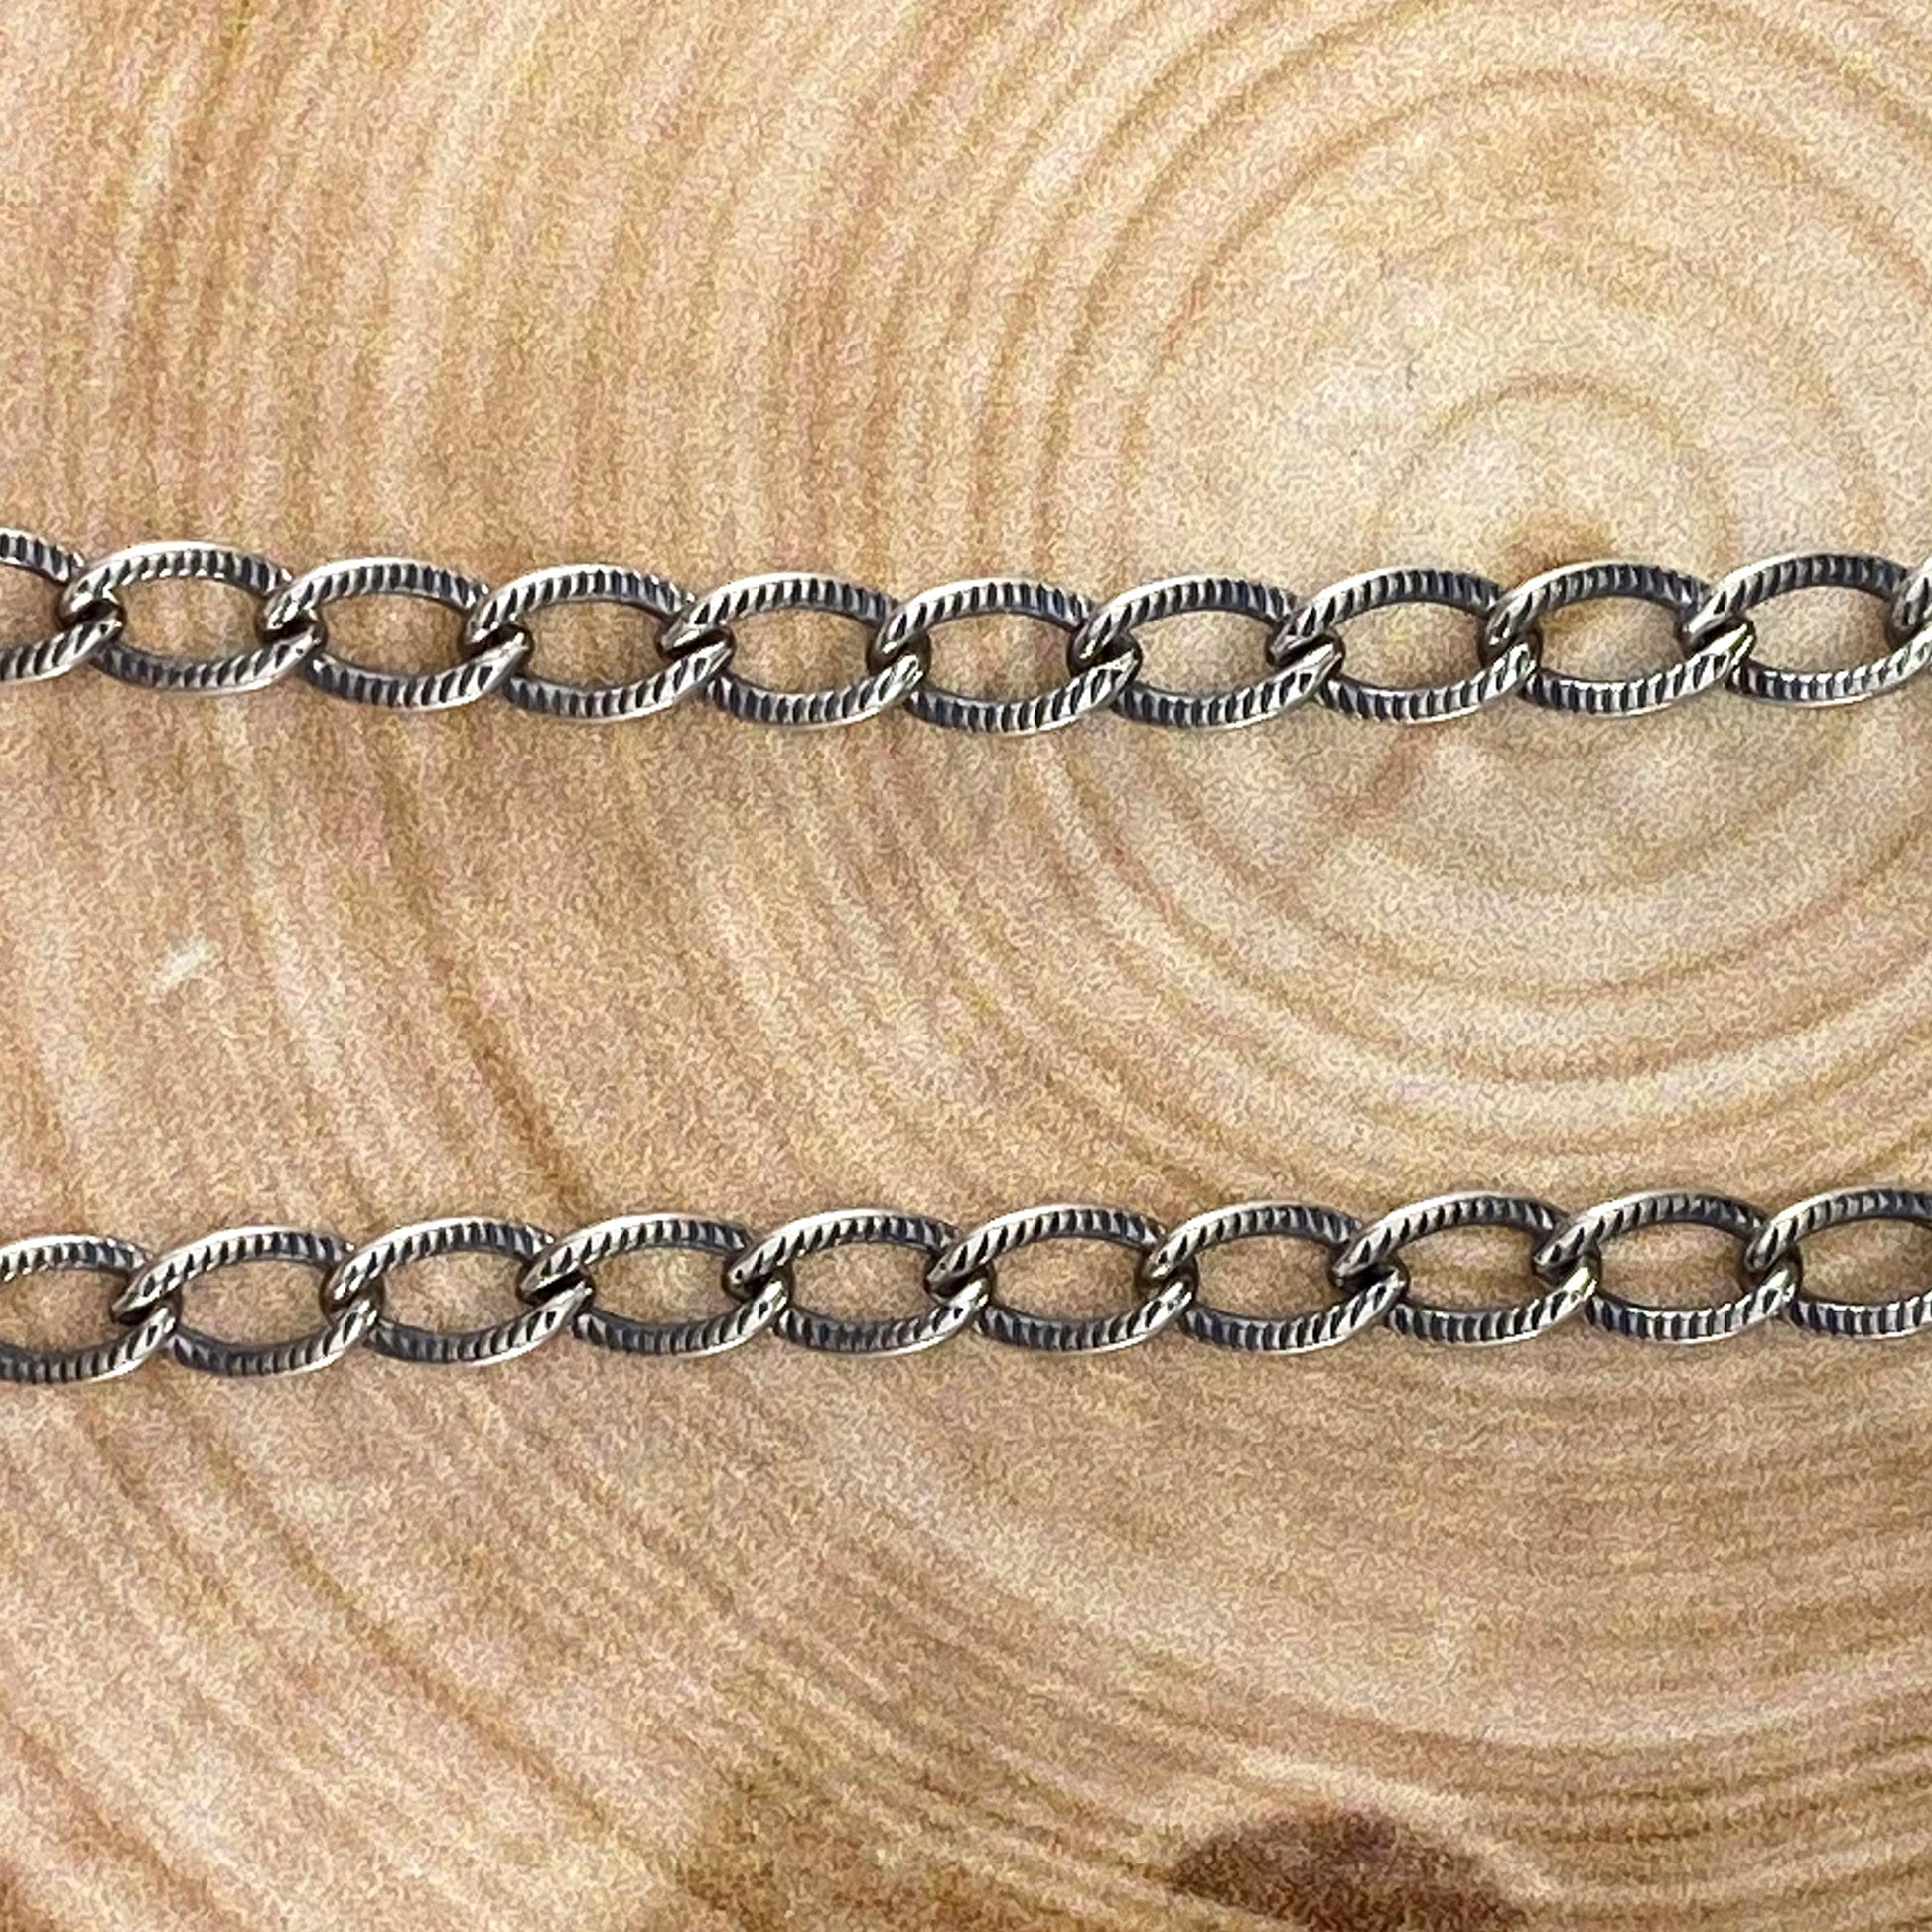 Oxidized Sterling Silver Curb Chains View 2 - Stone Treasures by the Lake